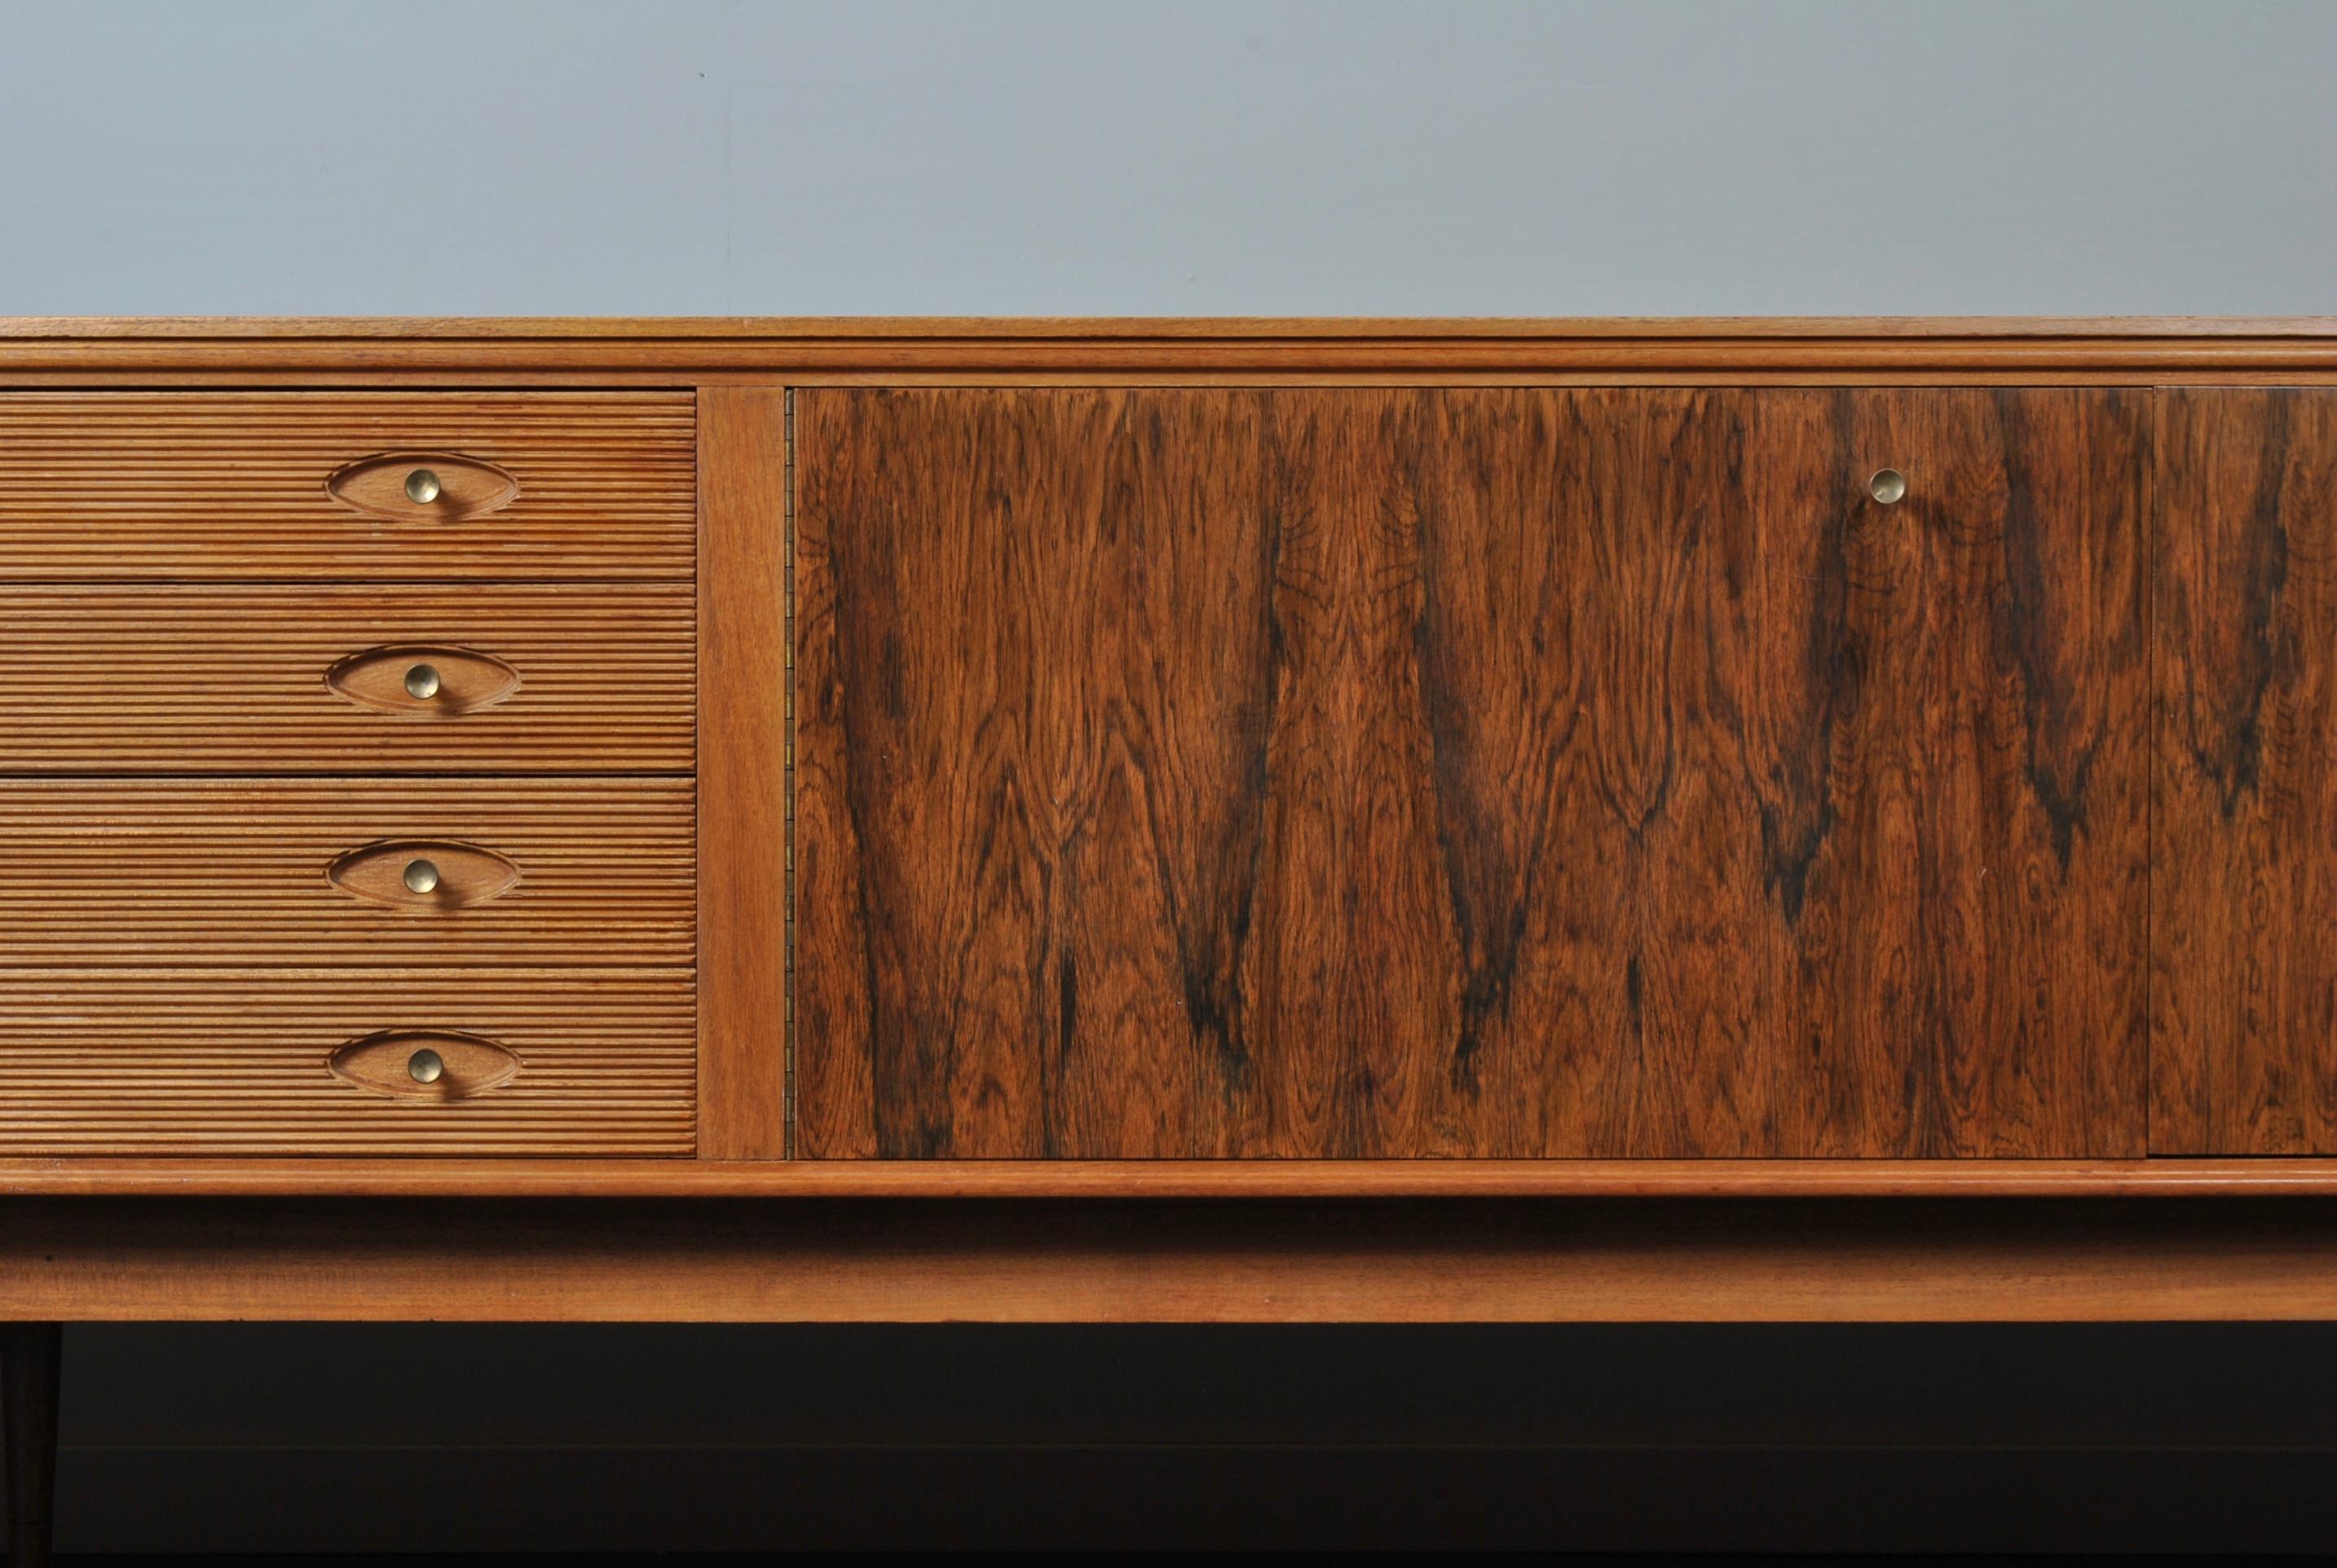 A large midcentury sideboard by Archie Shine. A Classic design by Robert Heritage with trademark reeded drawer fronts and brass handles. Produced in the UK circa 1960. A very stylish yet totally practical piece of midcentury design furniture.